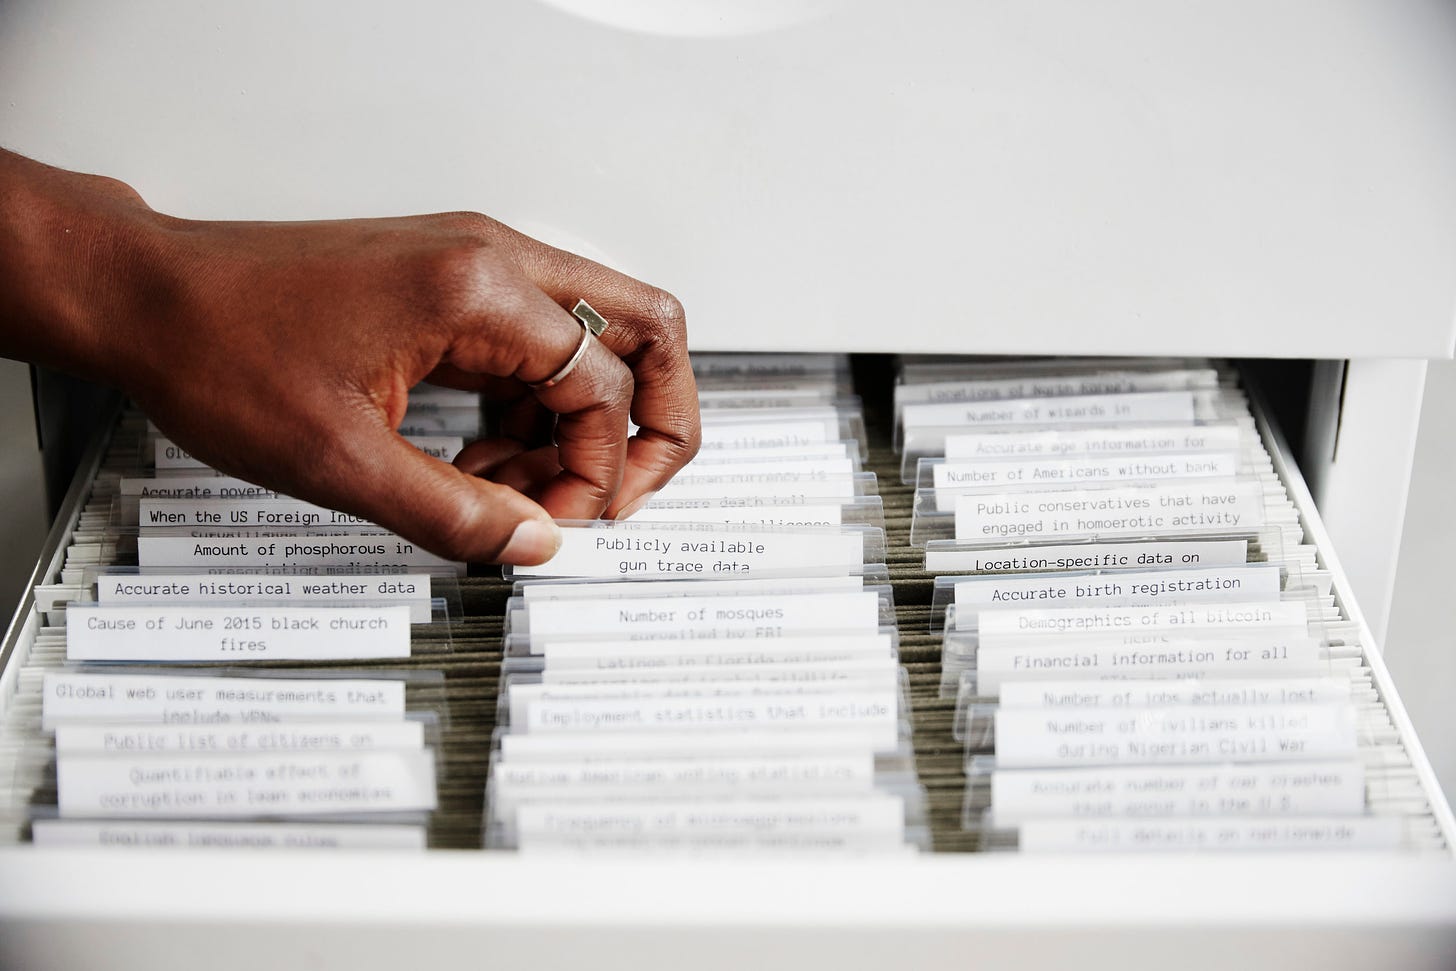 The Library of Missing Datasets by Mimi Onuoha showing a light grey maxi-filing cabinet filled with labelled but empty files. The hand of a Black person is show extracting one file labelled “Publicly available gun trace data”.